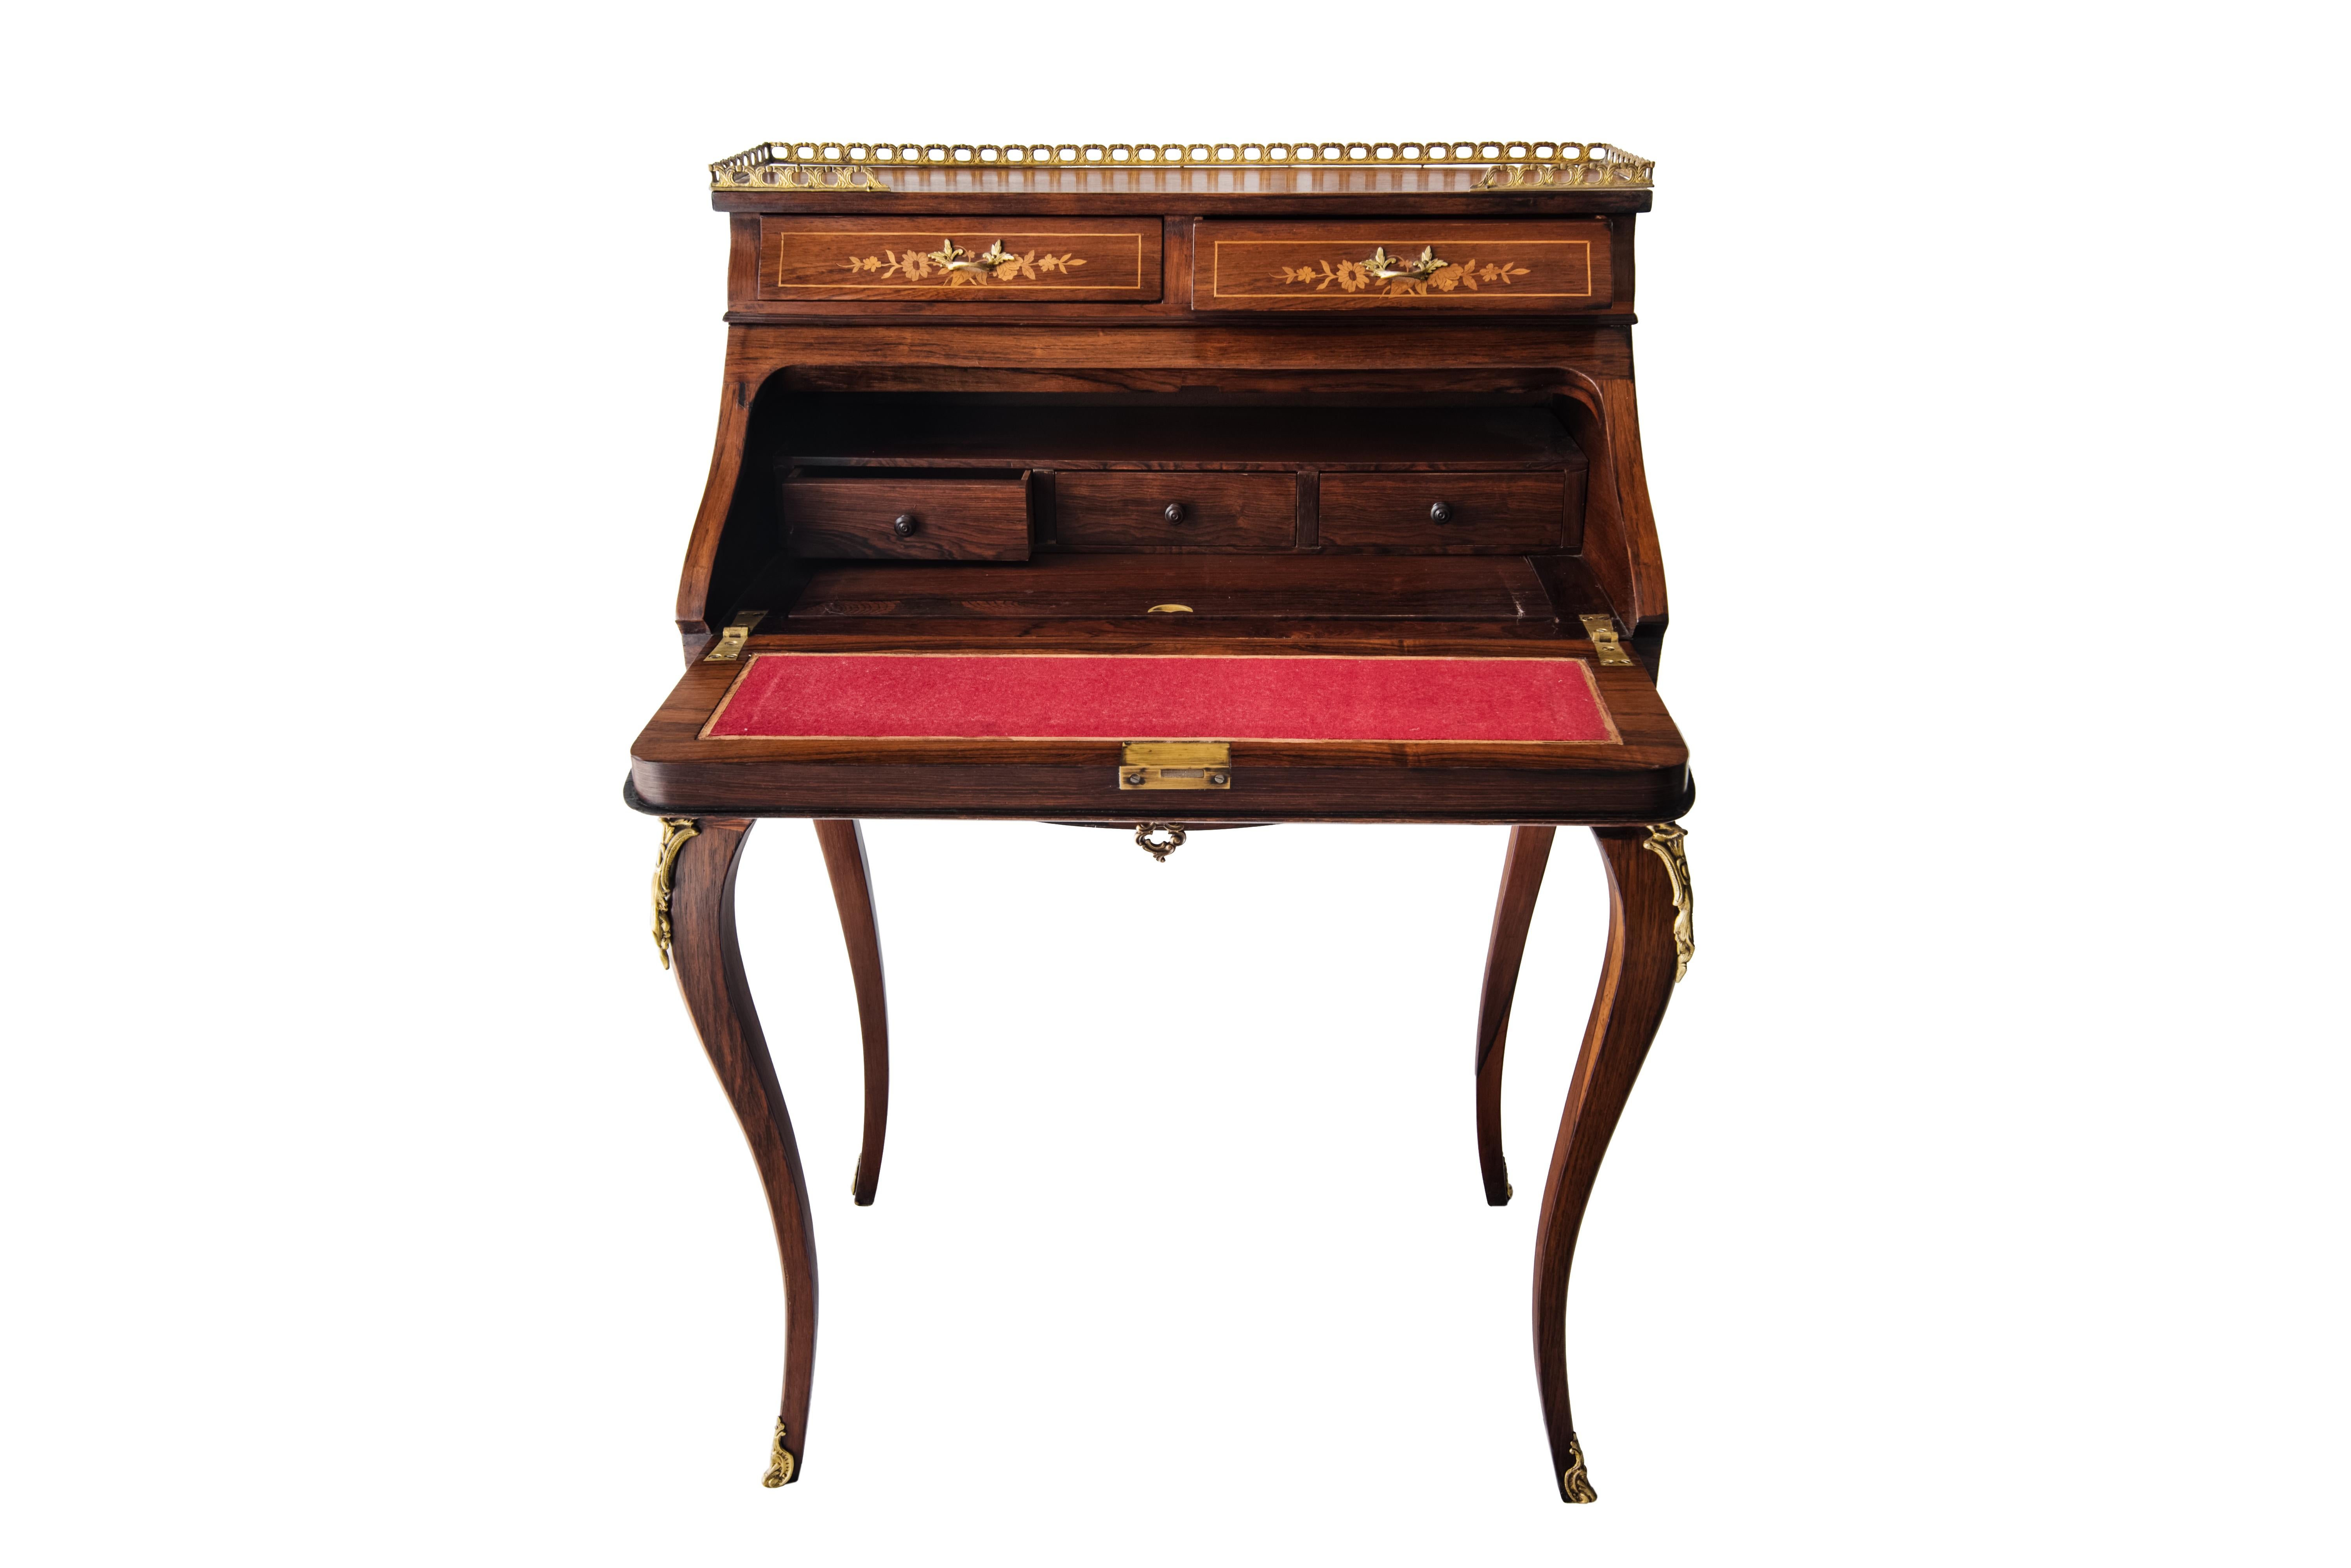 Late 19th Century 19th Century French Louis XV Style Marquetry Bureau Desk with Secret For Sale